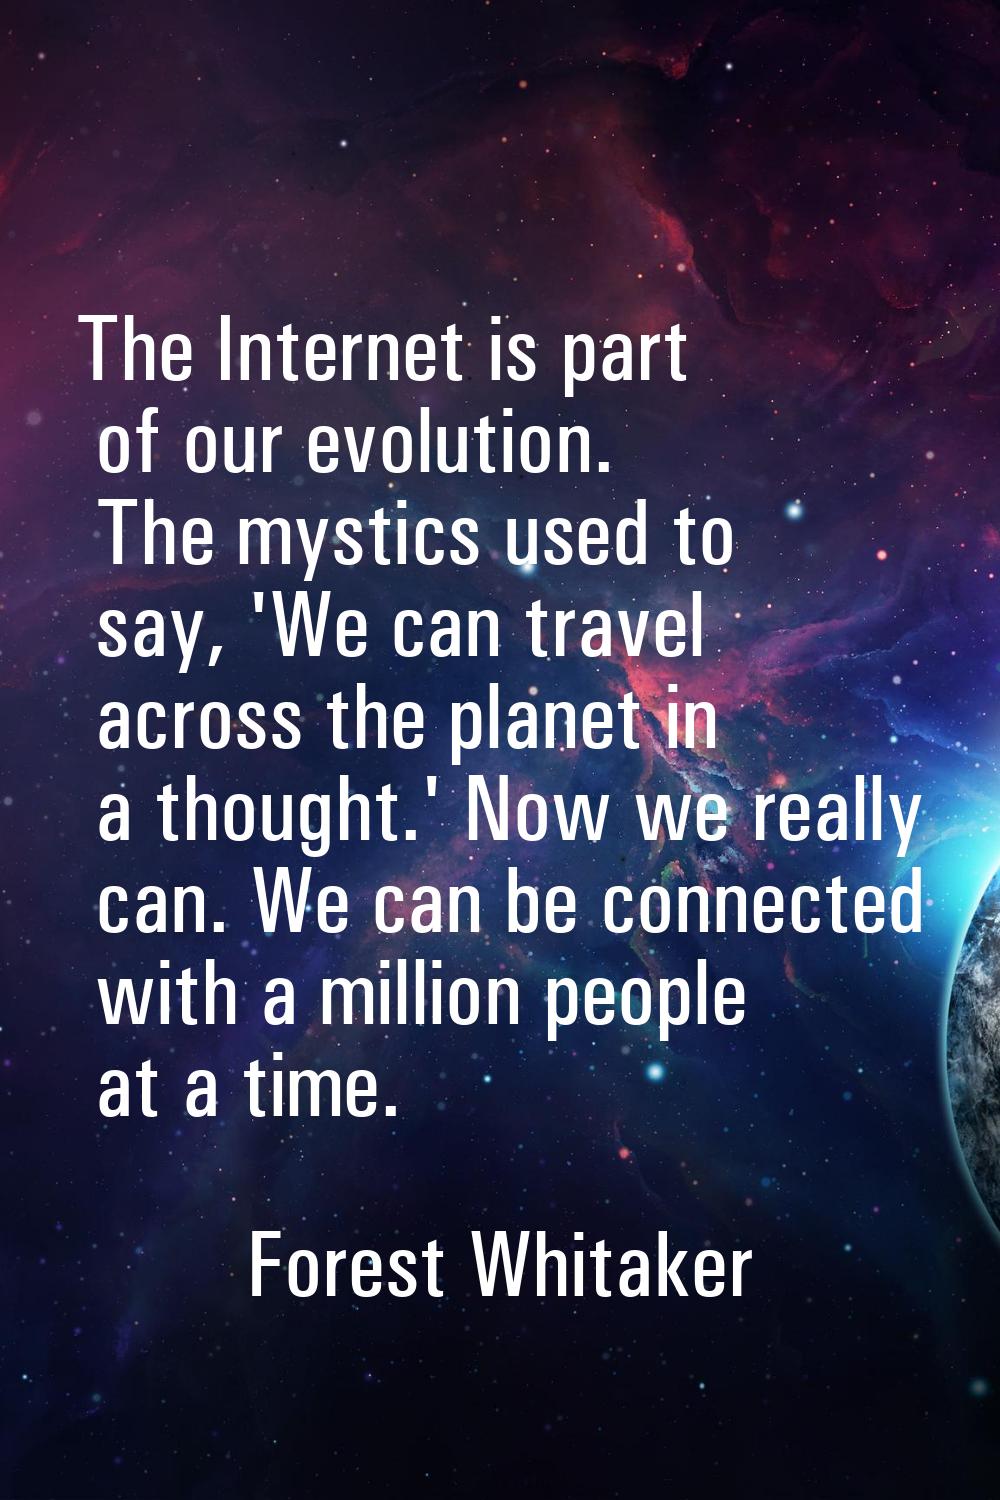 The Internet is part of our evolution. The mystics used to say, 'We can travel across the planet in